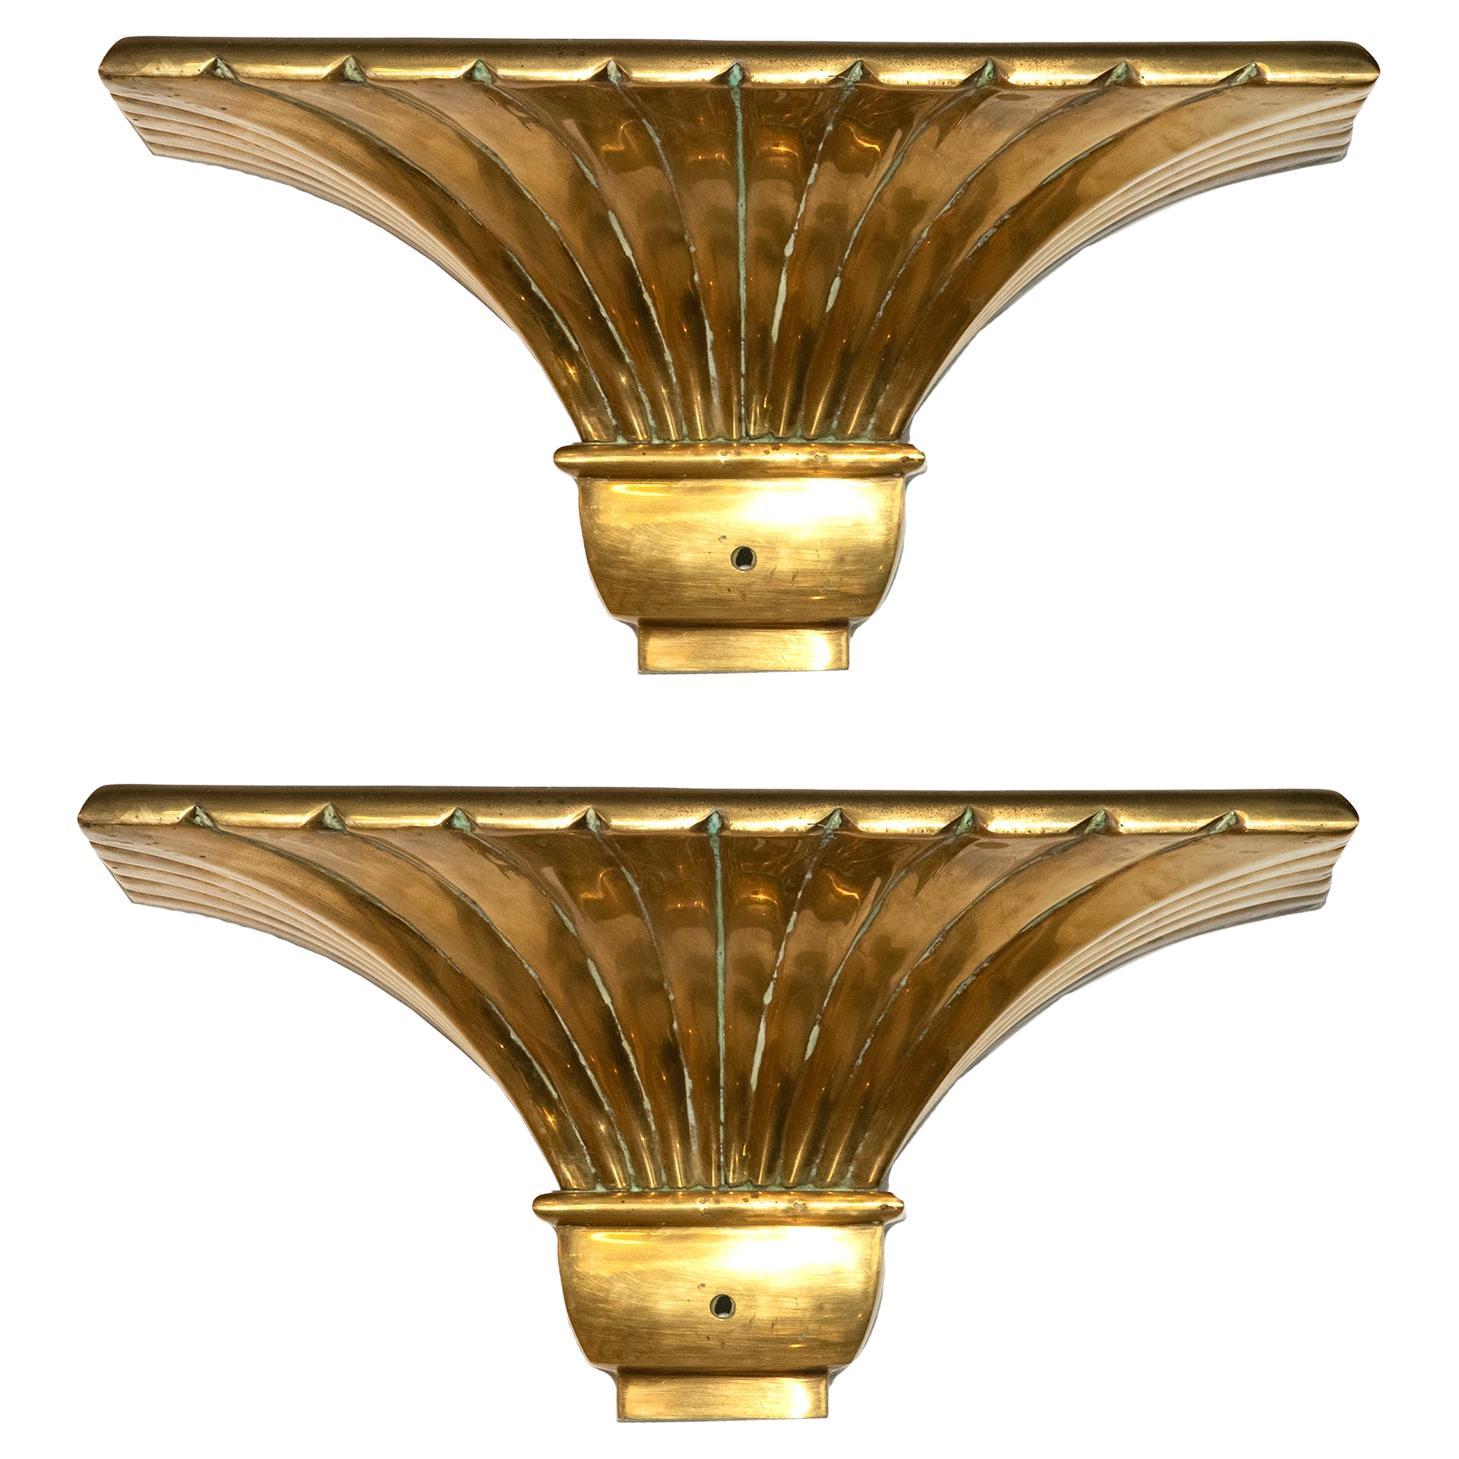  Pair Of Chapman Lighting Brass Neoclassical Style Wall-Mounted Lights For Sale